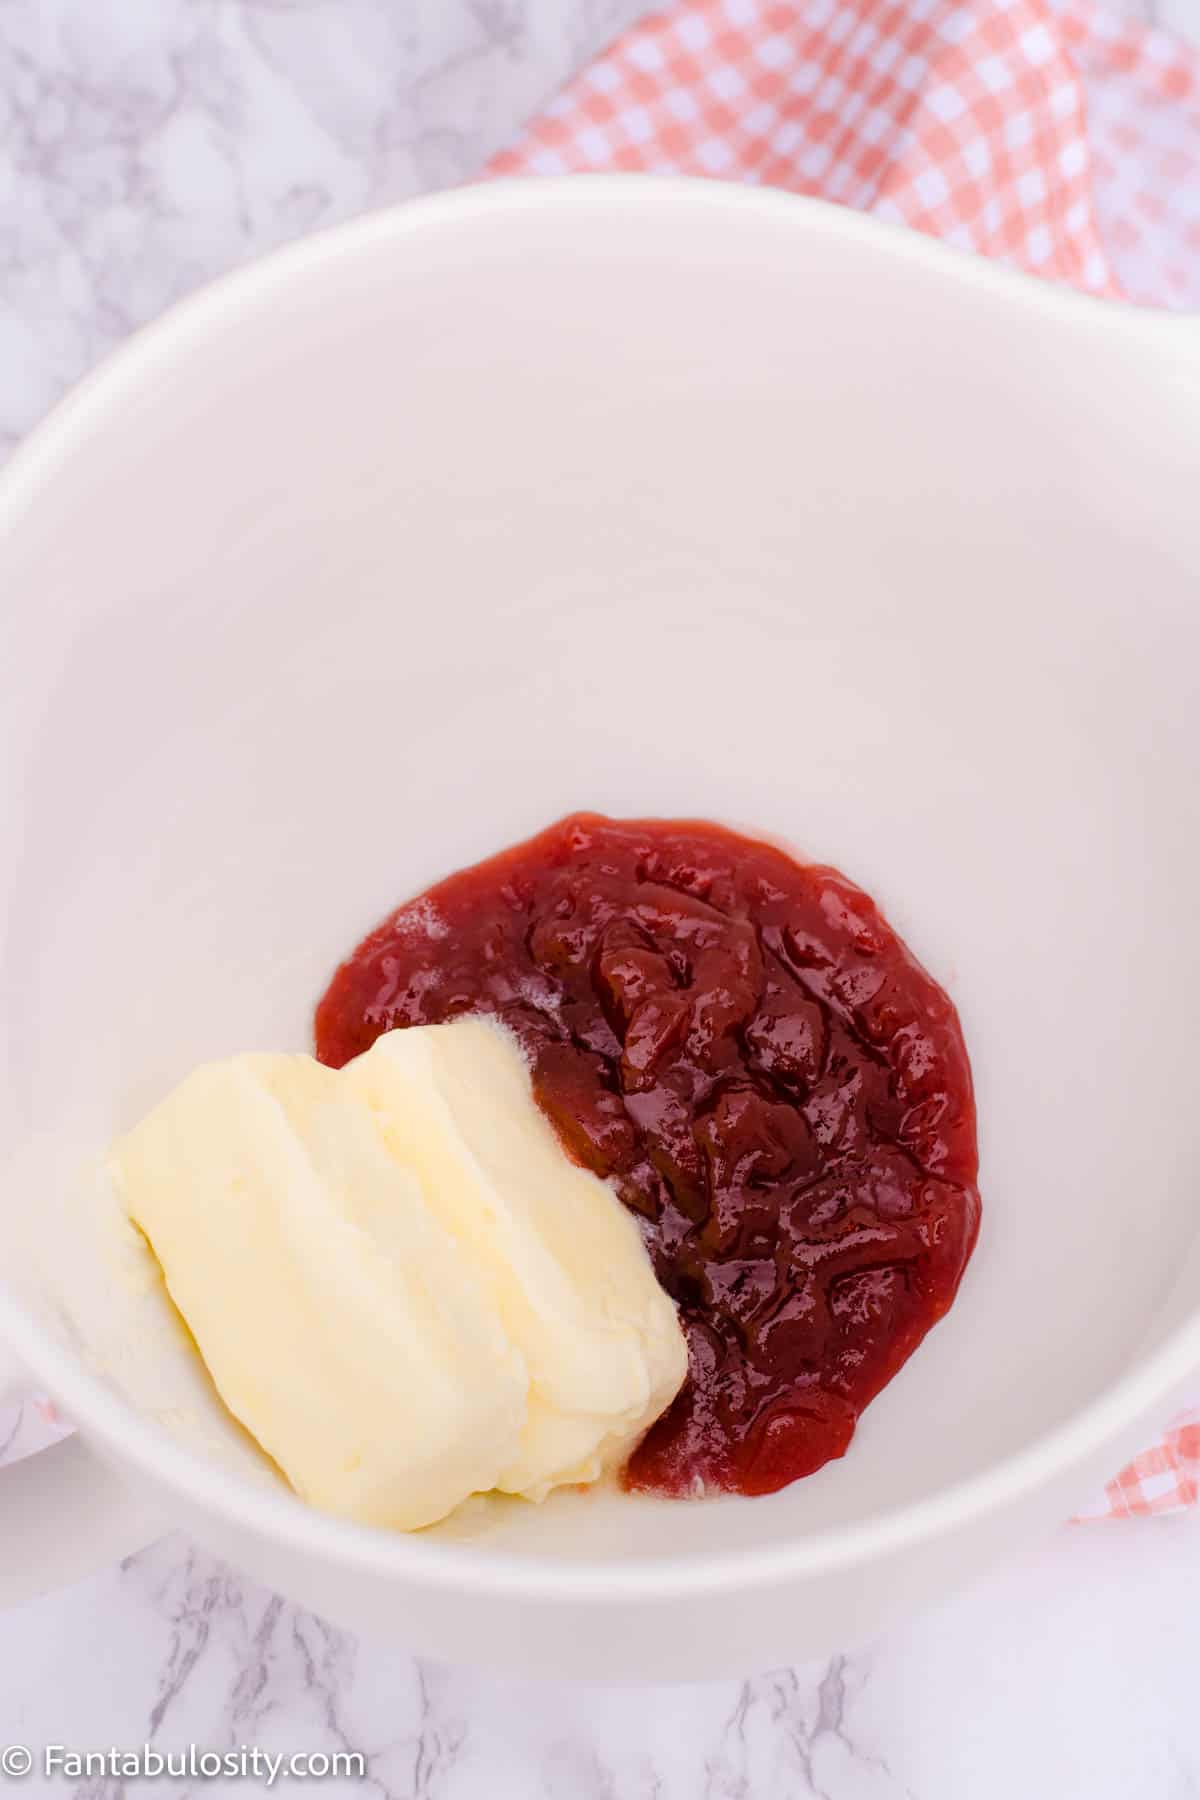 Butter and Jam